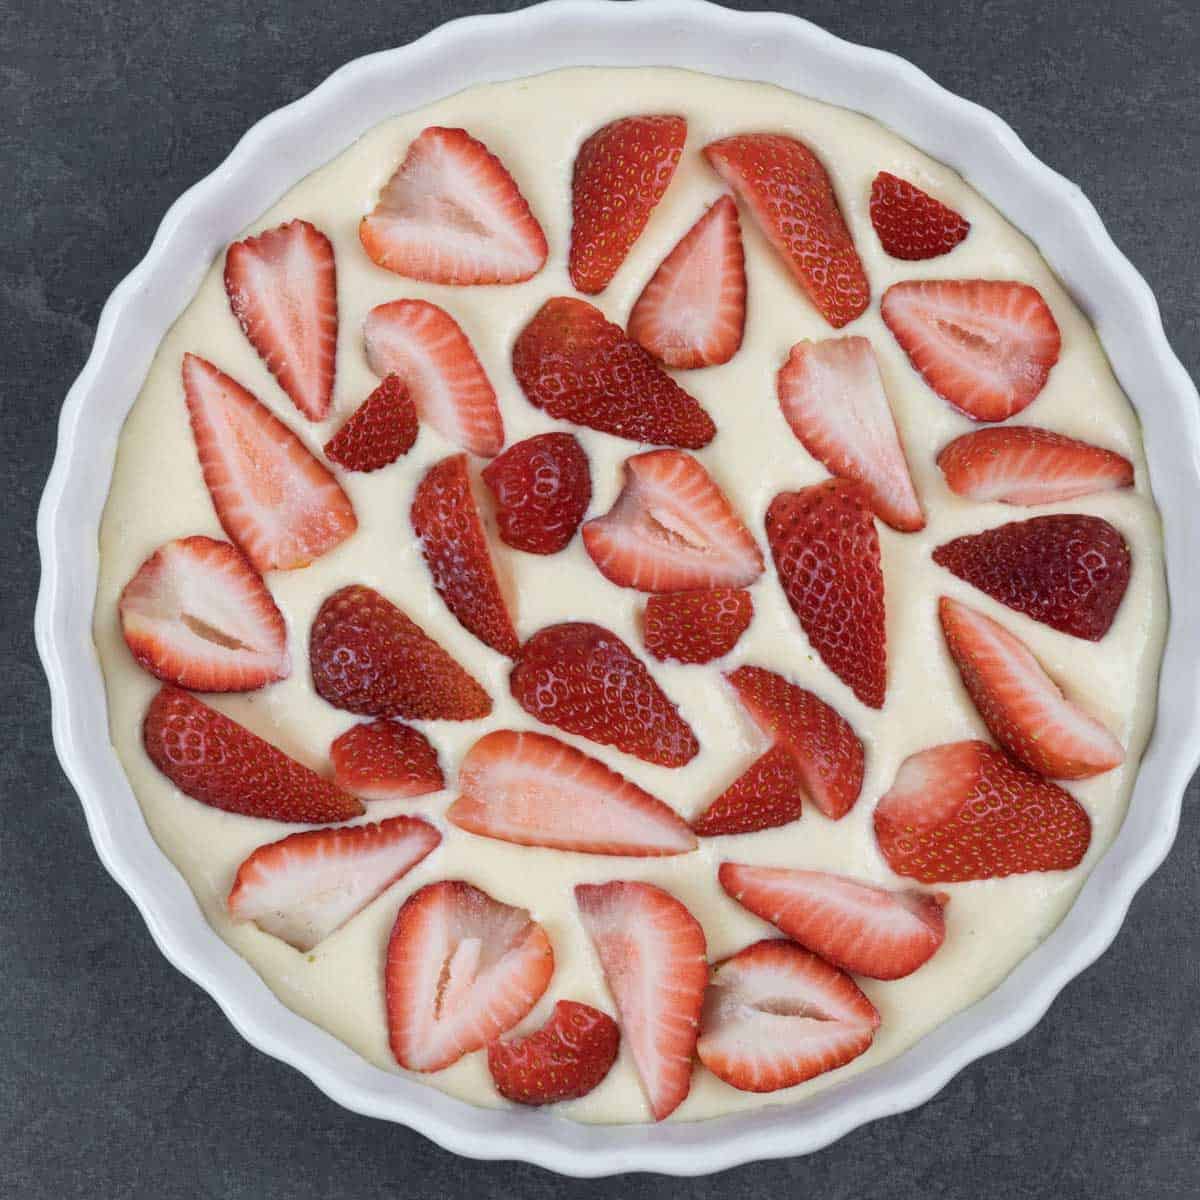 Clafoutis batter in tart dish topped with strawberry quarters ready for the oven.